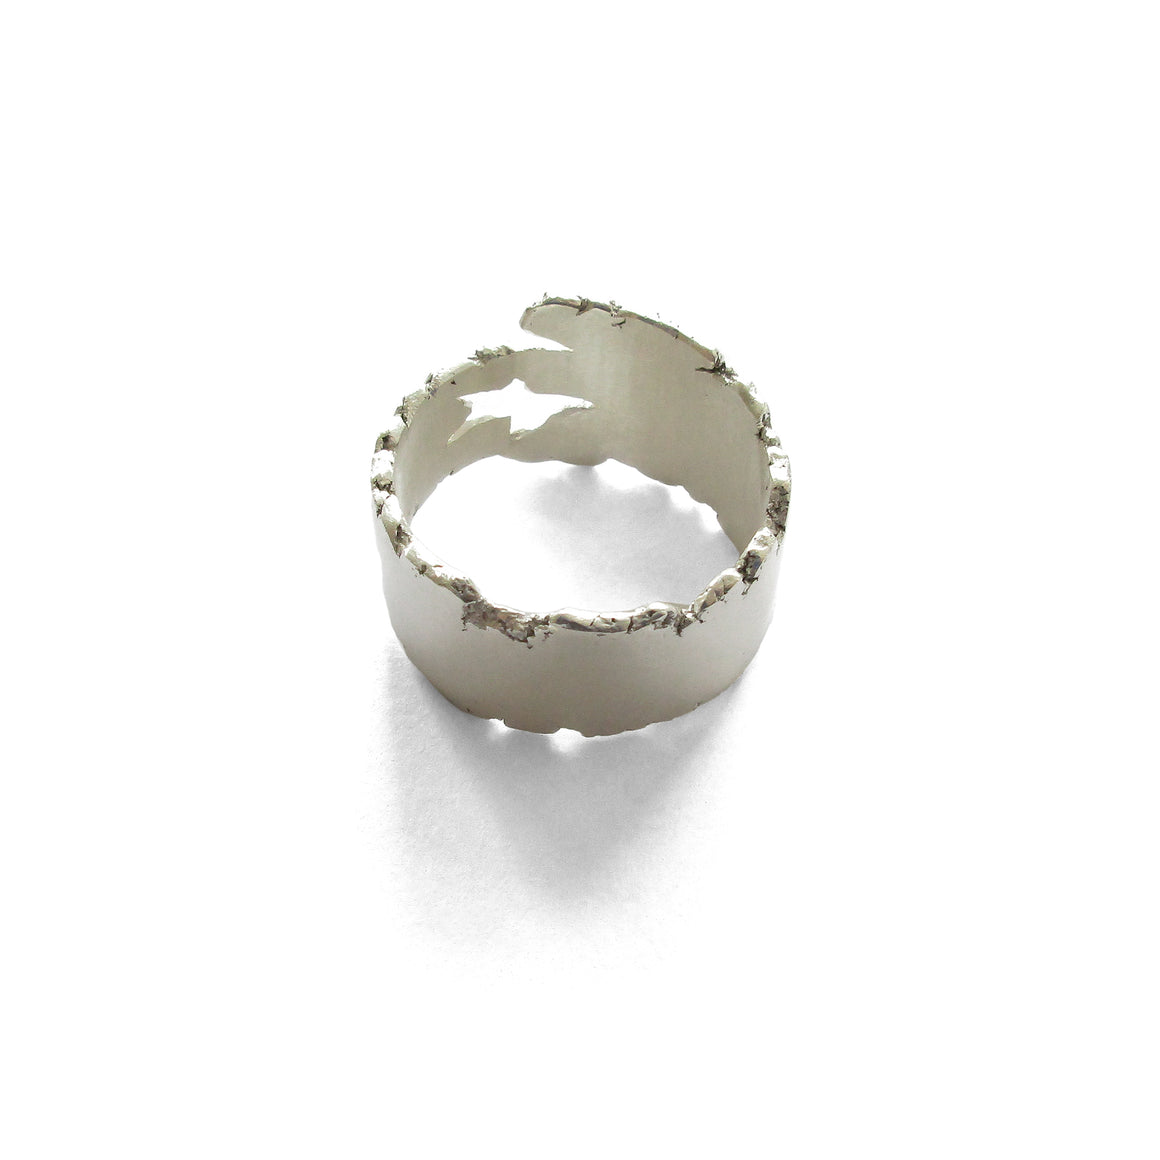 sterling silver matte surface hand-made, one-of-a-kind approx. size 13 great alone, stacked, or worn as a mid-finger ring